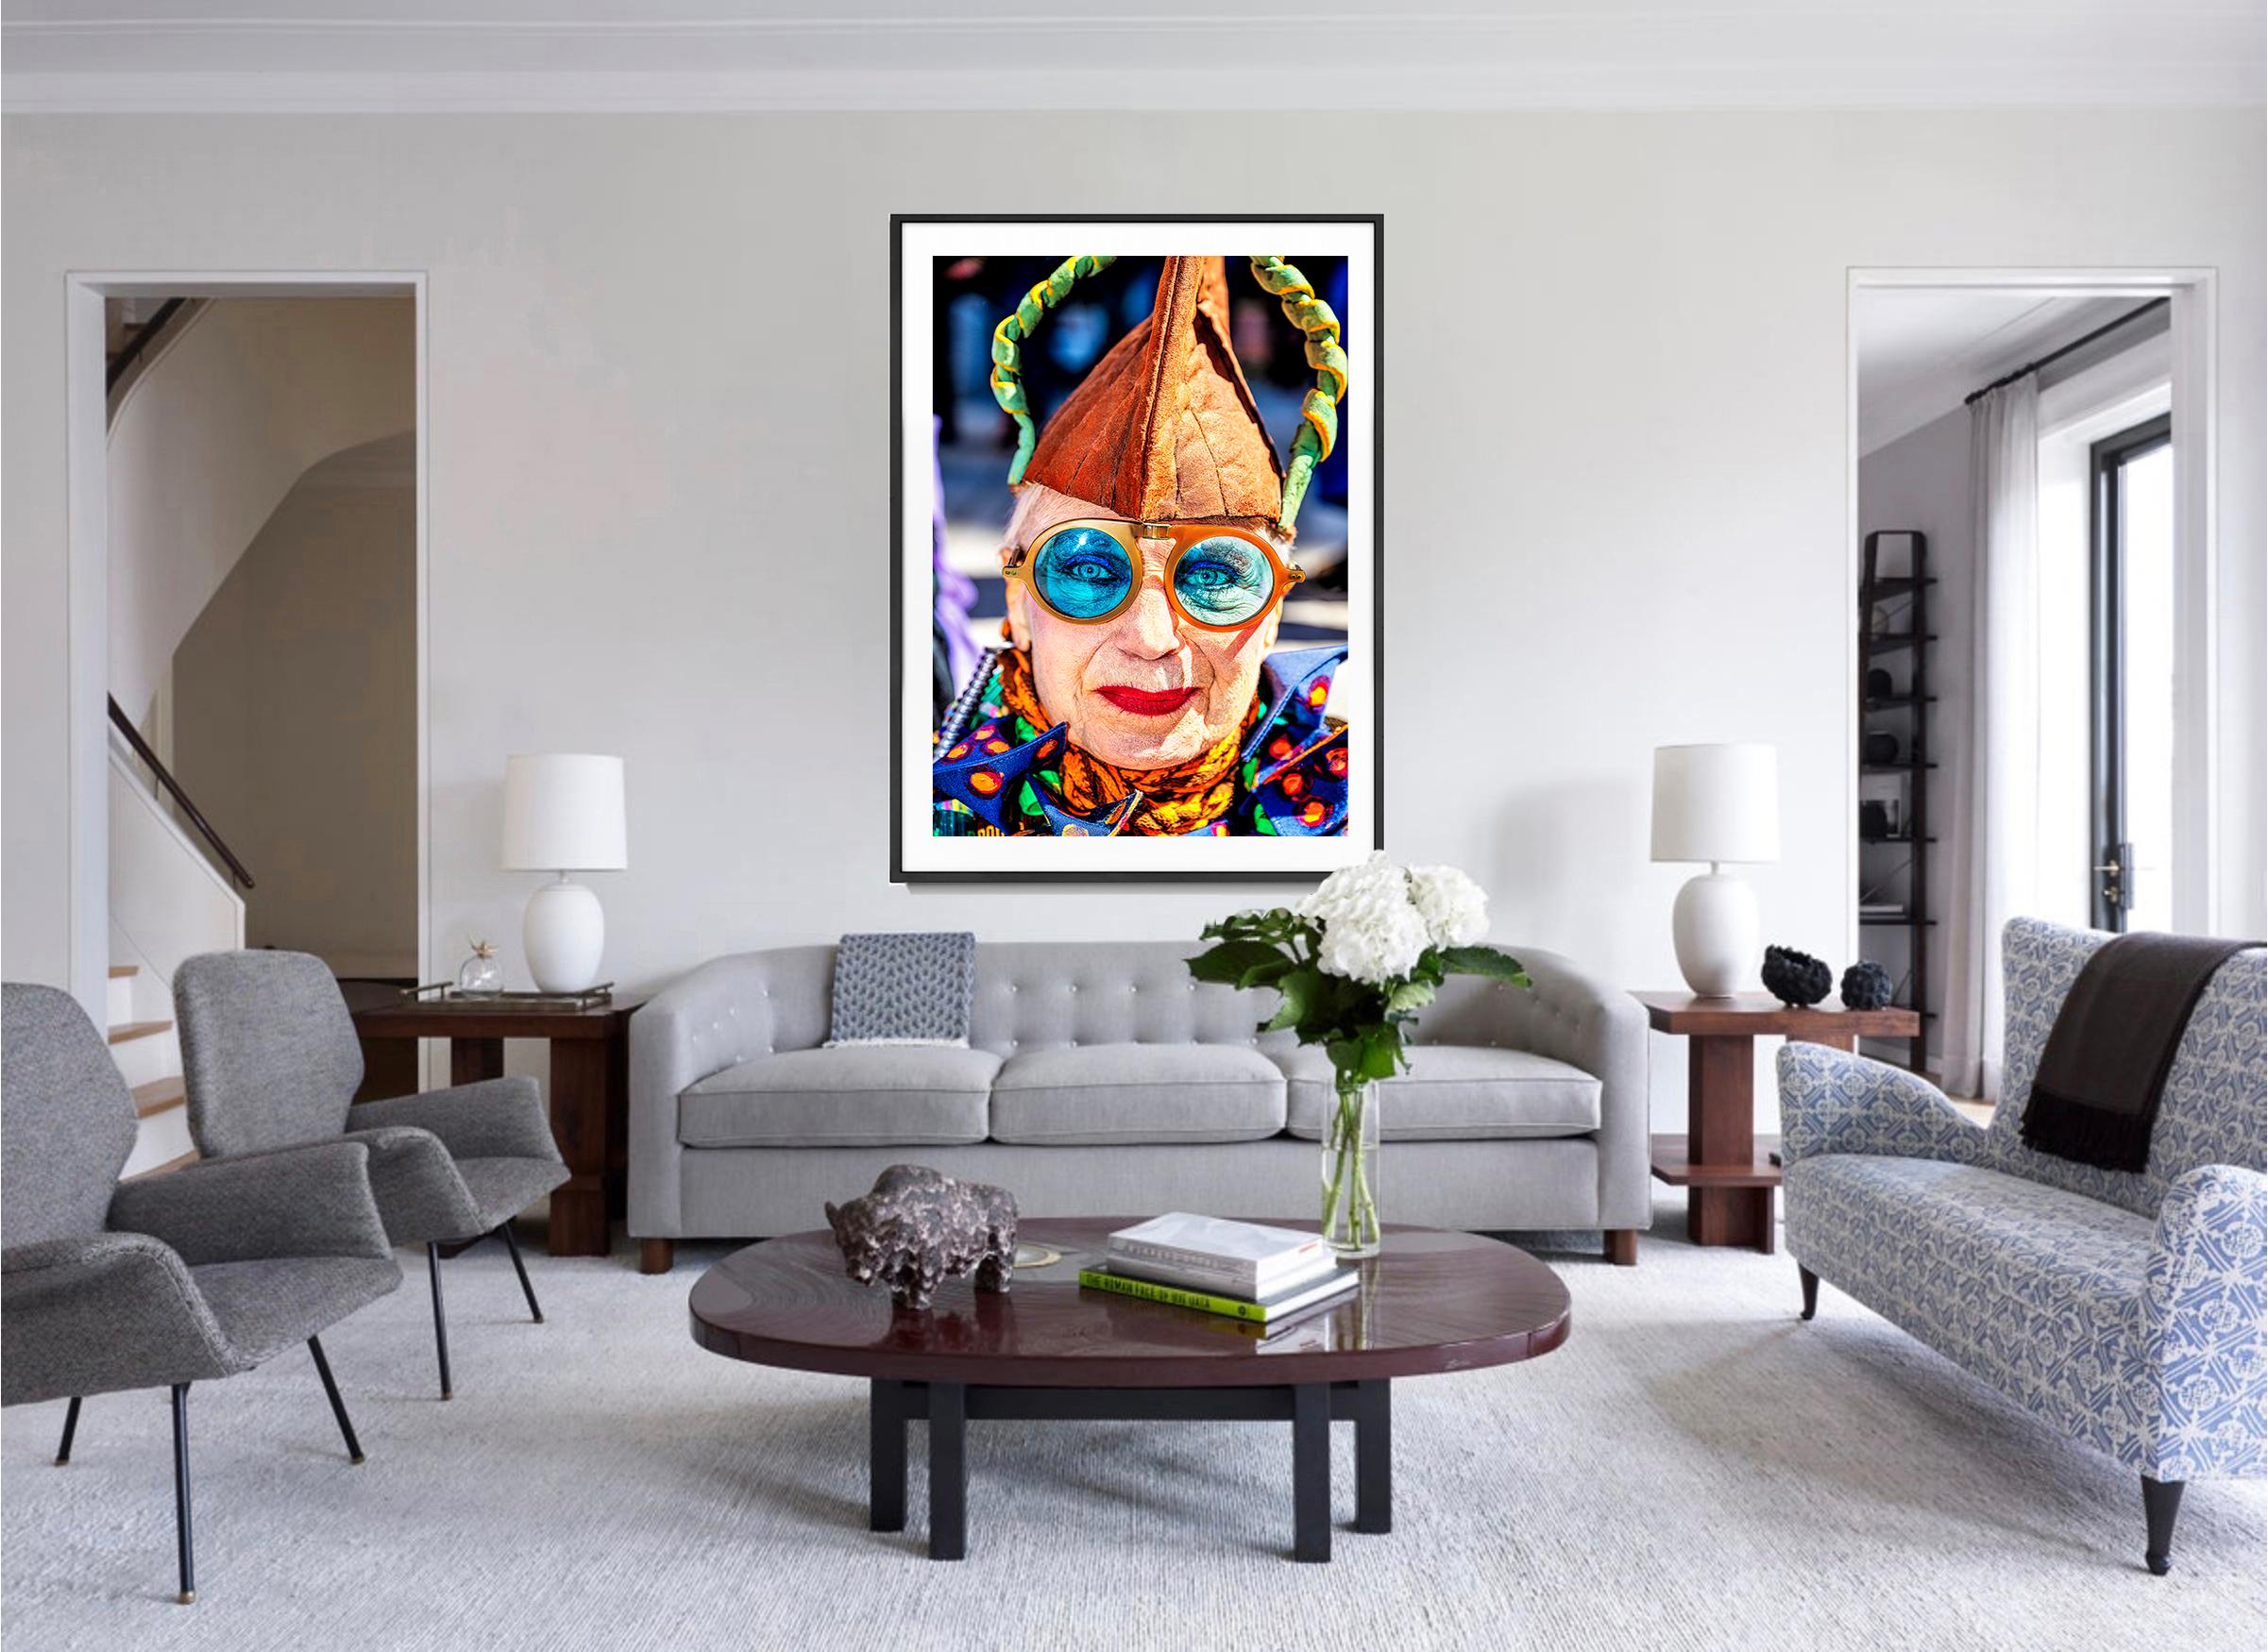 Whimsical Woman with Colorfully Fanciful Outfit Blue Eyeglasses - Contemporary Photograph by Mitchell Funk